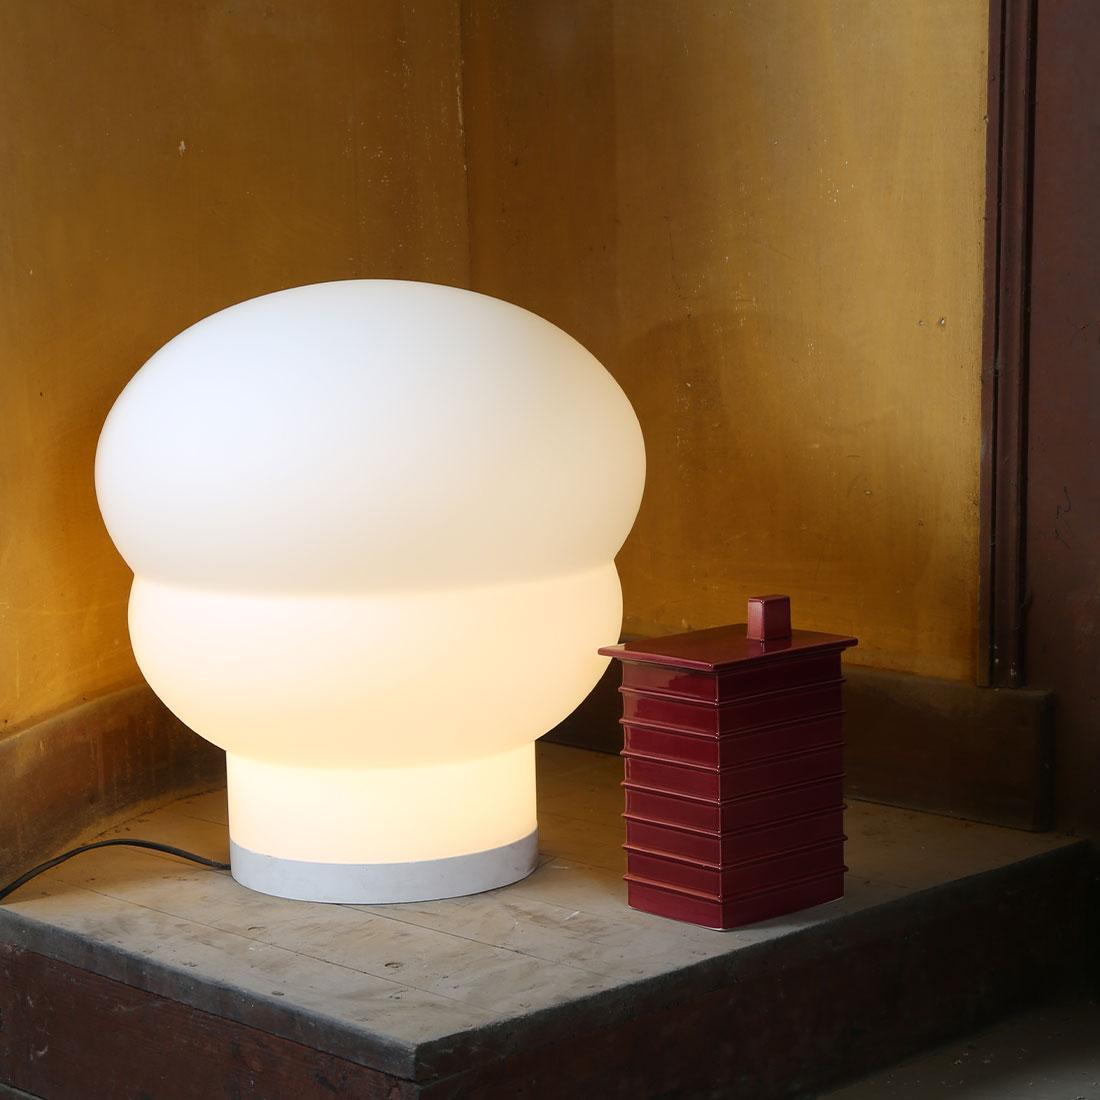 No-made, the Dutch design team of Cleo Maxime and Linde Freya enjoy combining materials with cultural dialogue. Kumo, their series of table and floor lighting is modelled in the style of arbitrary cloudscapes, and the surface resembles Japanese